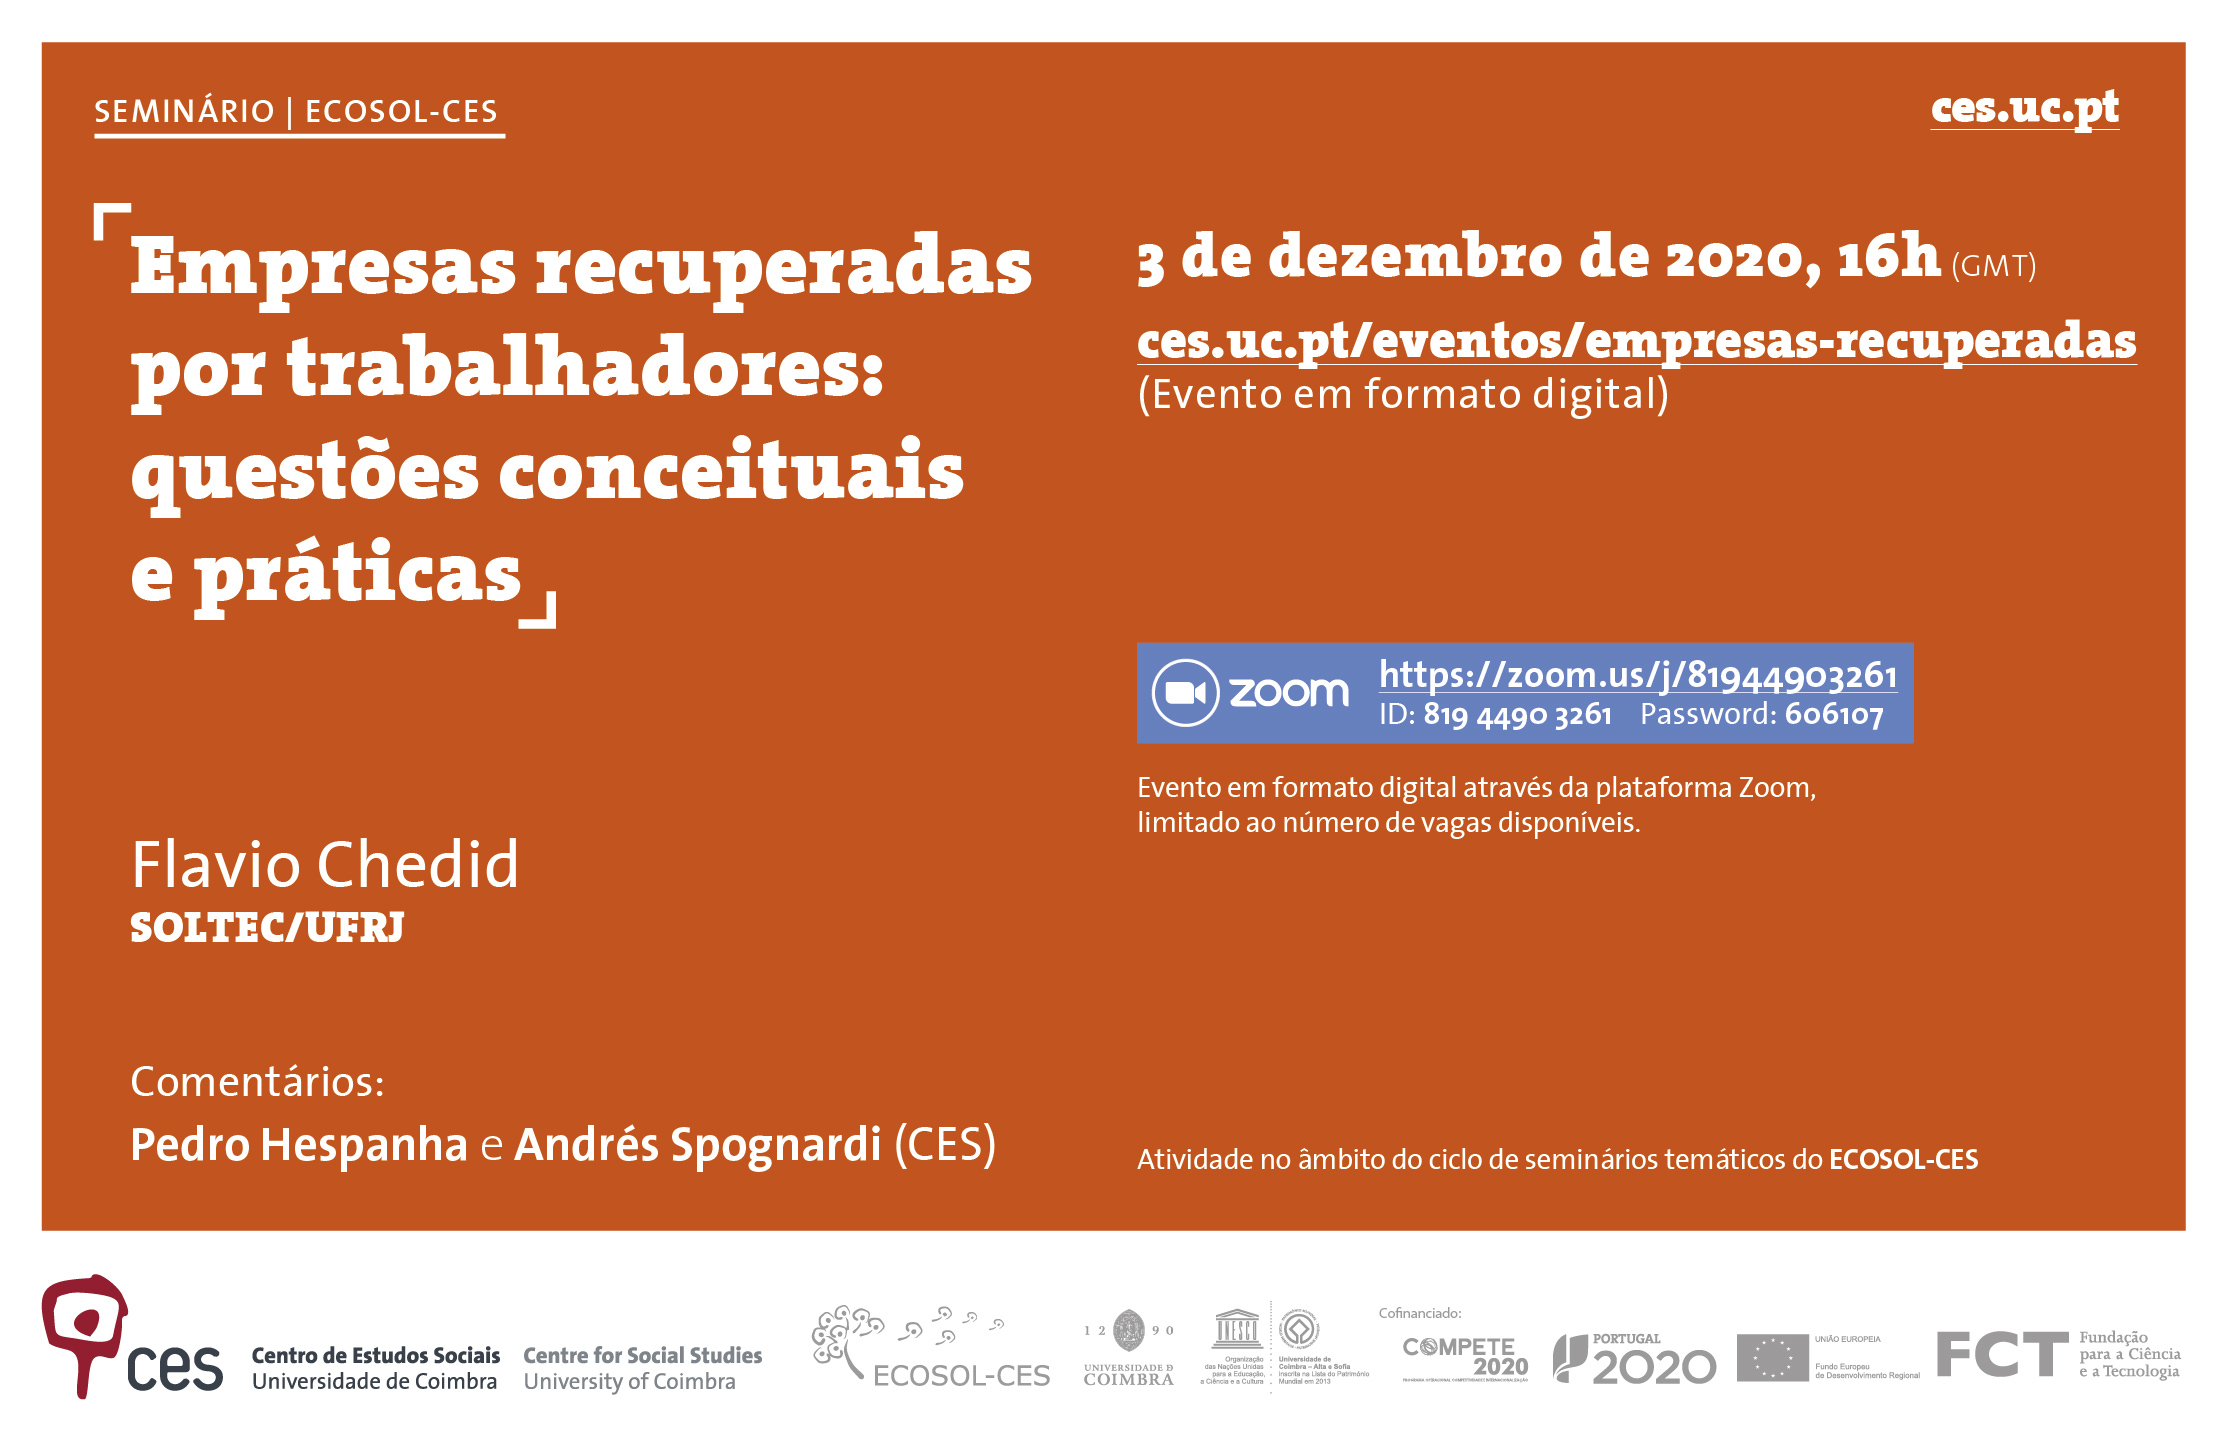 Companies recovered by workers: conceptual and practical issues<span id="edit_31474"><script>$(function() { $('#edit_31474').load( "/myces/user/editobj.php?tipo=evento&id=31474" ); });</script></span>